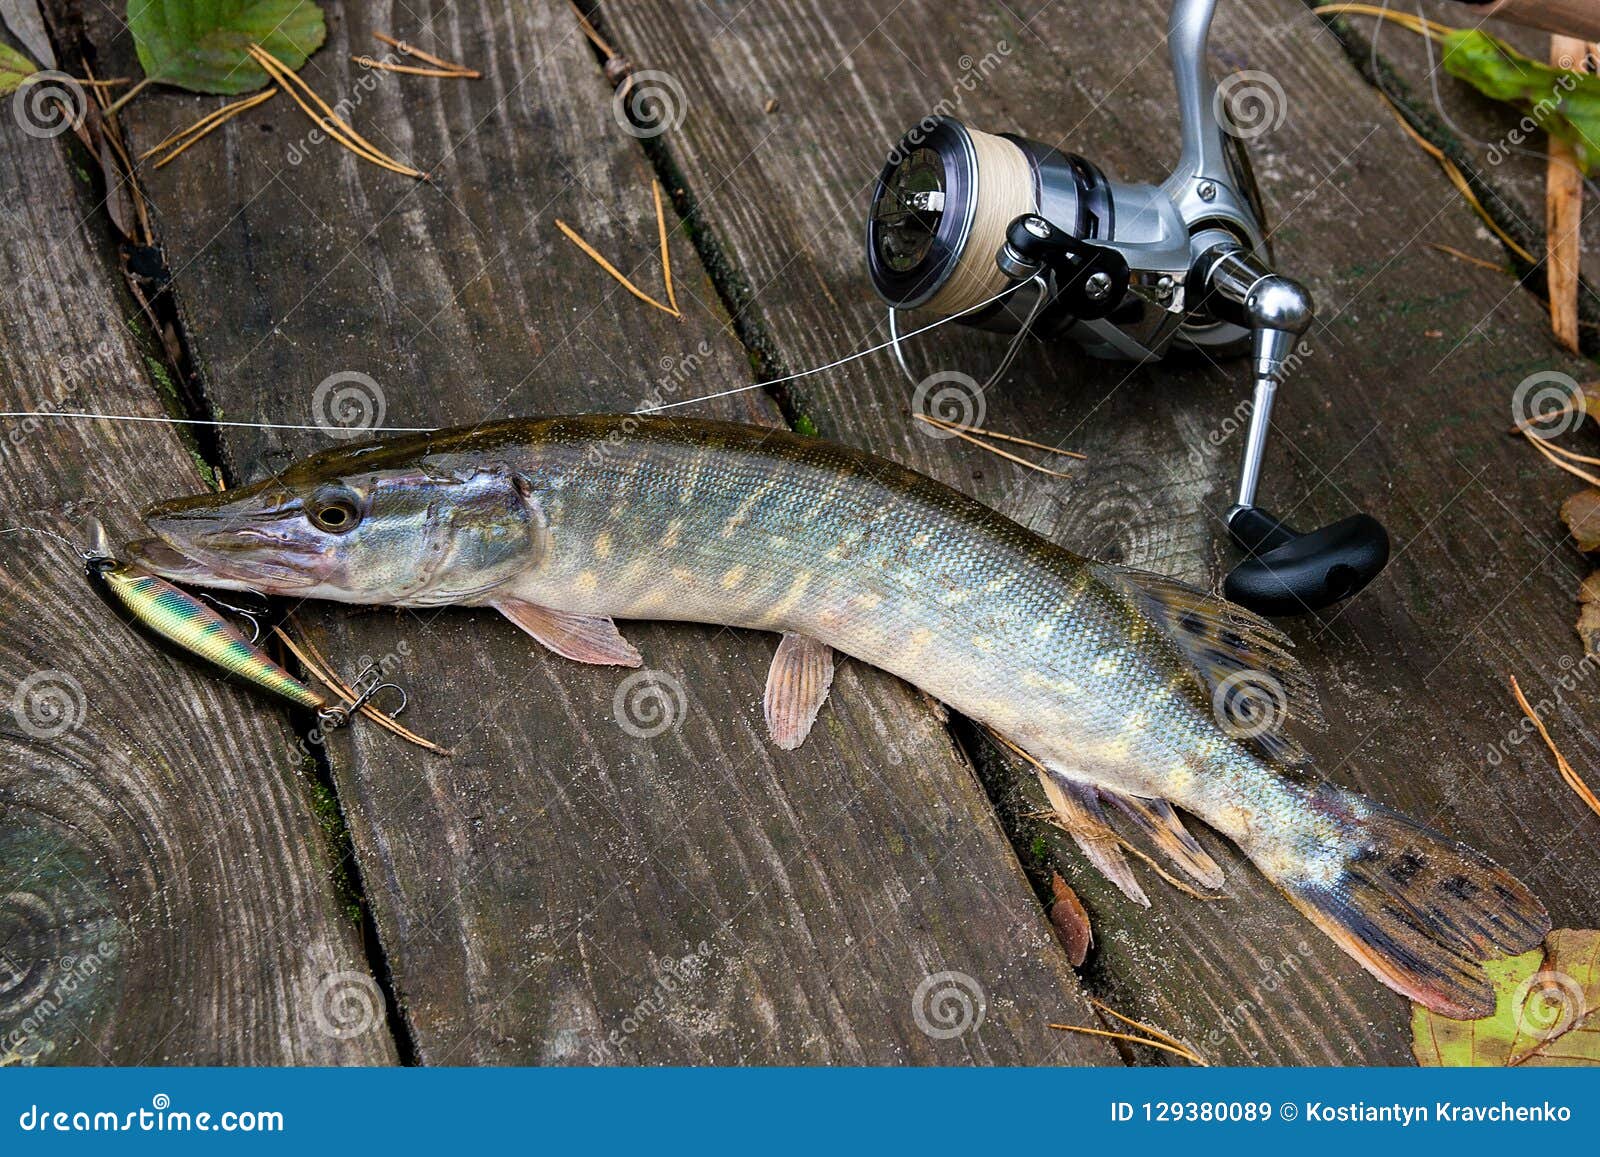 https://thumbs.dreamstime.com/z/freshwater-pike-fishing-bait-mouth-equipment-northern-fish-know-as-esox-lucius-rod-reel-lying-vintage-wooden-129380089.jpg